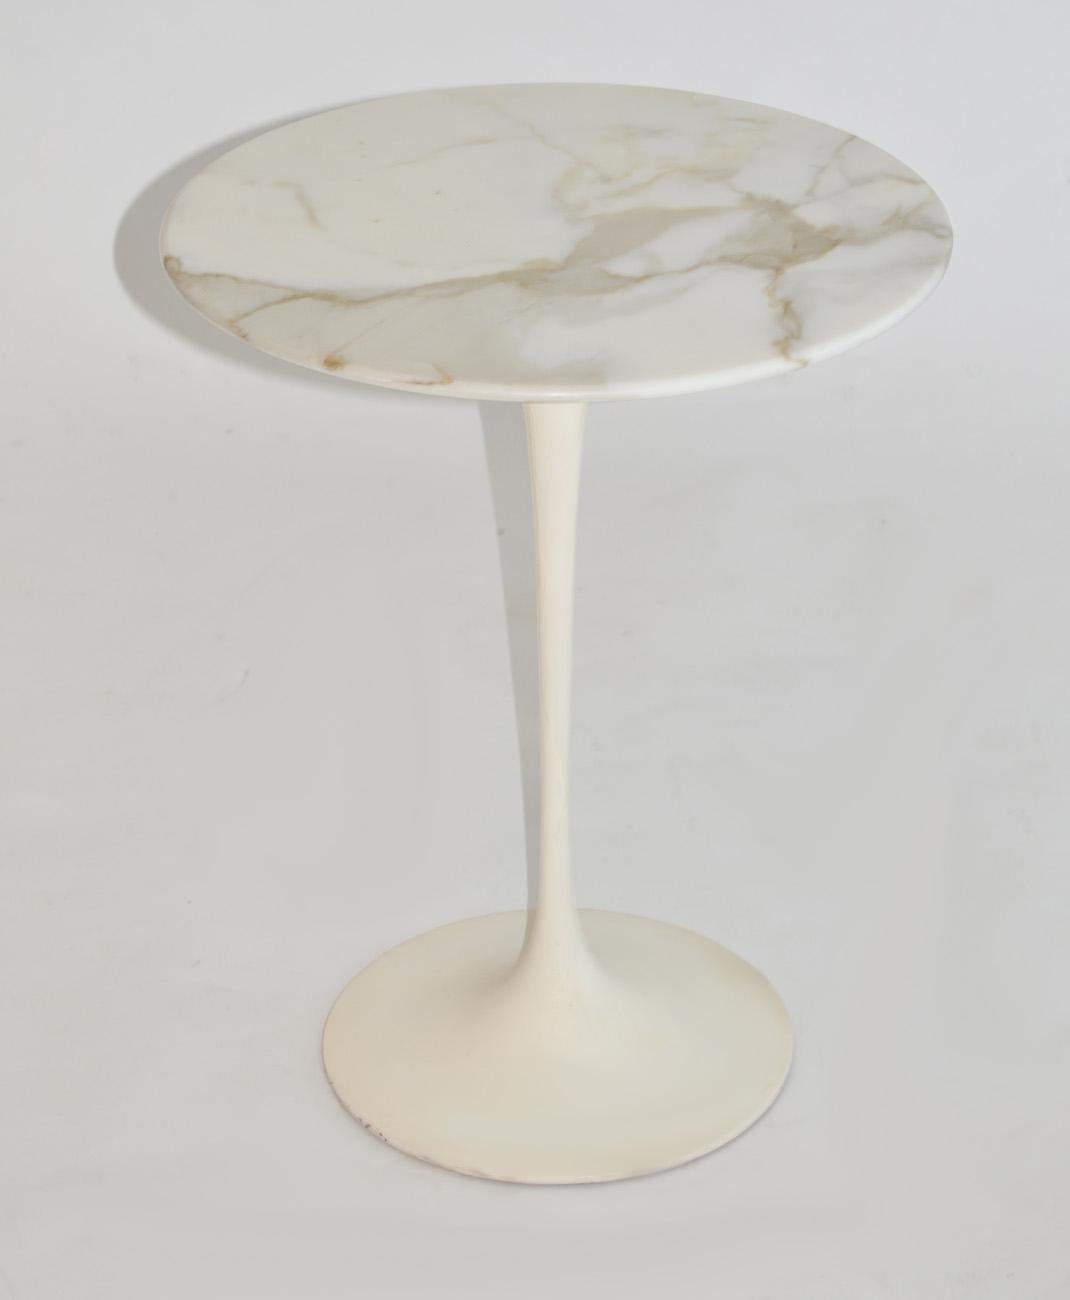 Eero Saarinen Tulip side table in marble by Knoll, circa1960. Knife-edge beveled Italian marble over white enameled cast metal base. Base in original condition could use re painting. Measures: 20.5 height x 16 diameter.